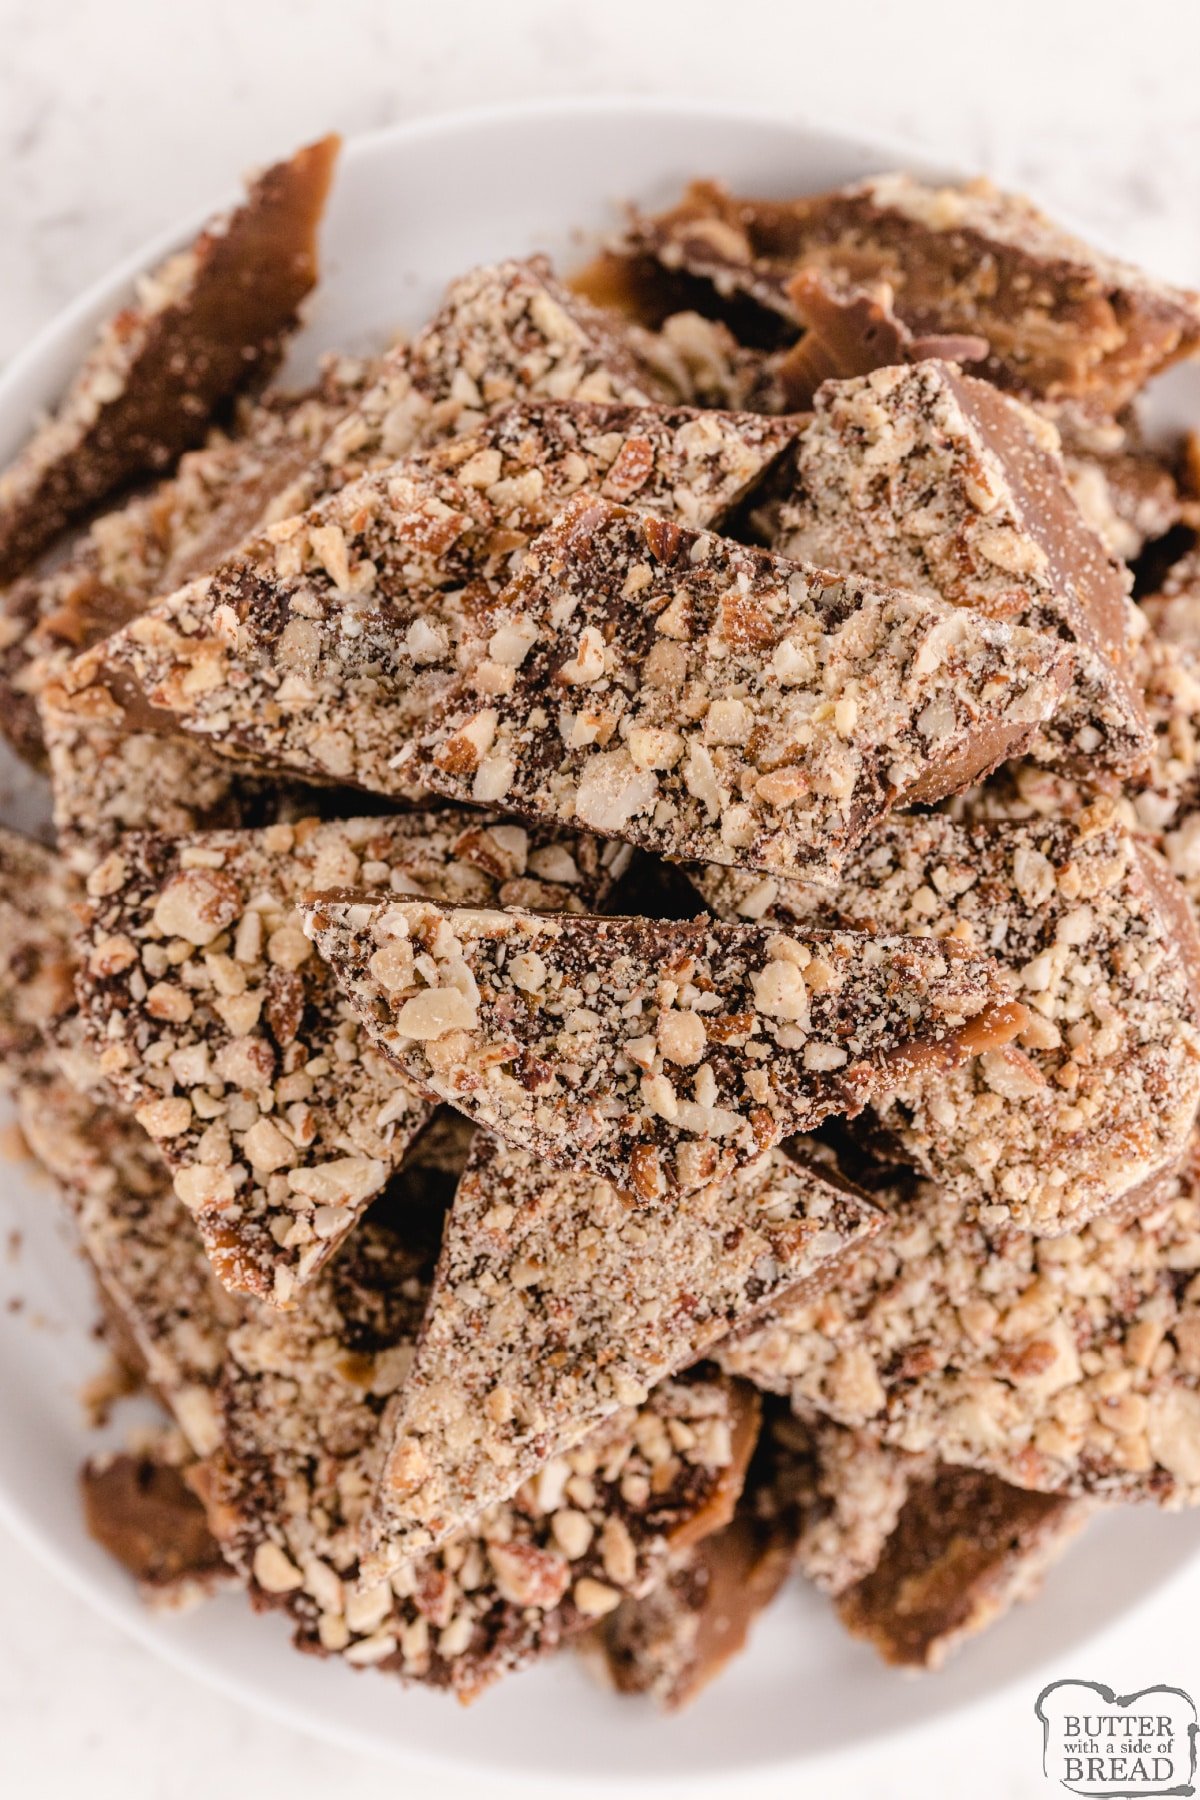 Easy Homemade Almond Roca made with only 4 ingredients! Delicious easy toffee recipe made with almonds, chocolate, butter and sugar that is even better than the store-bought version. 